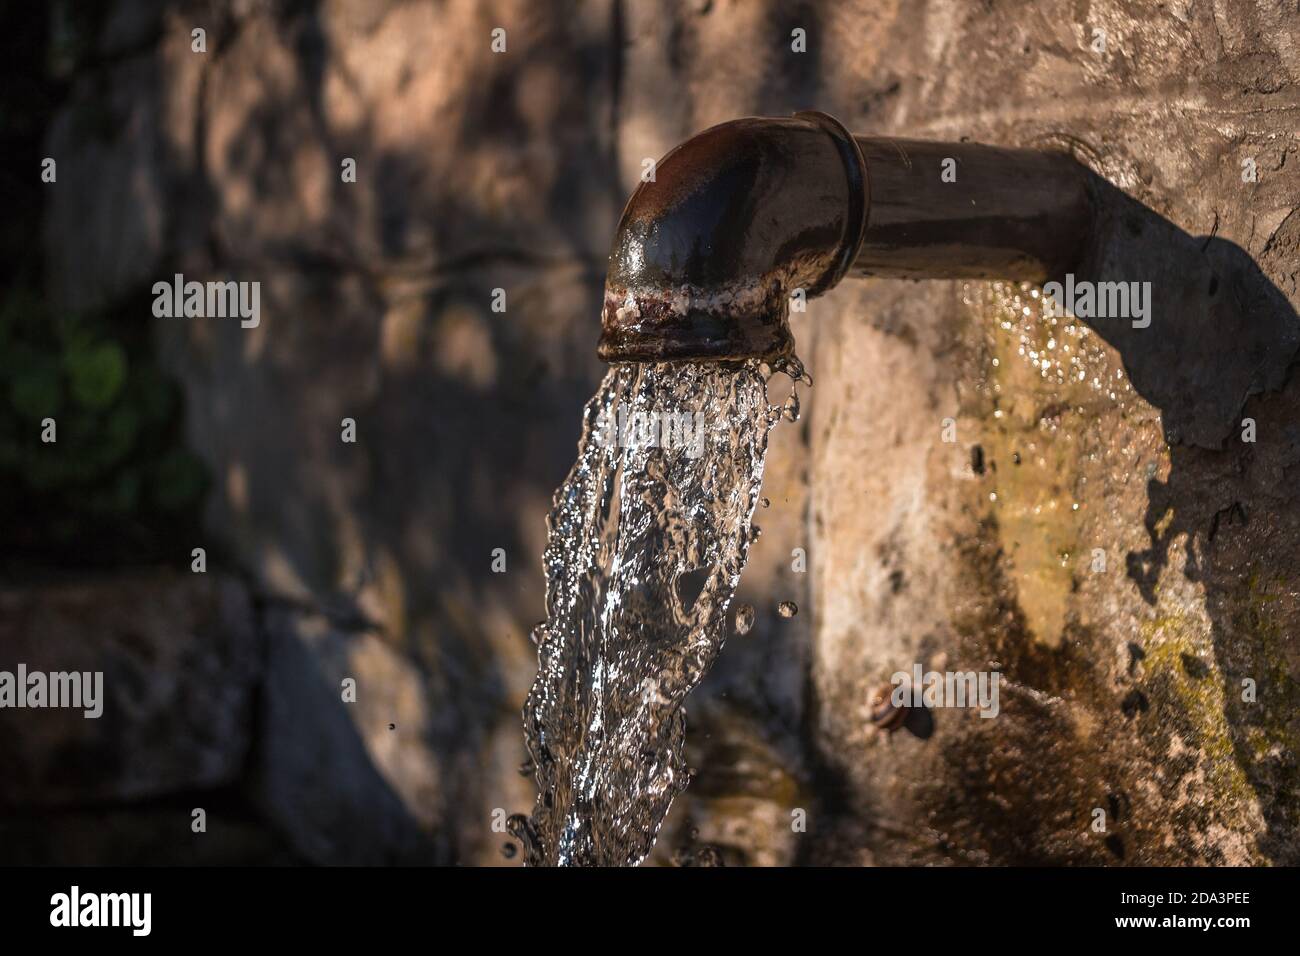 Old iron tap water pipe on the road, close up. Water flows constantly. Stock Photo